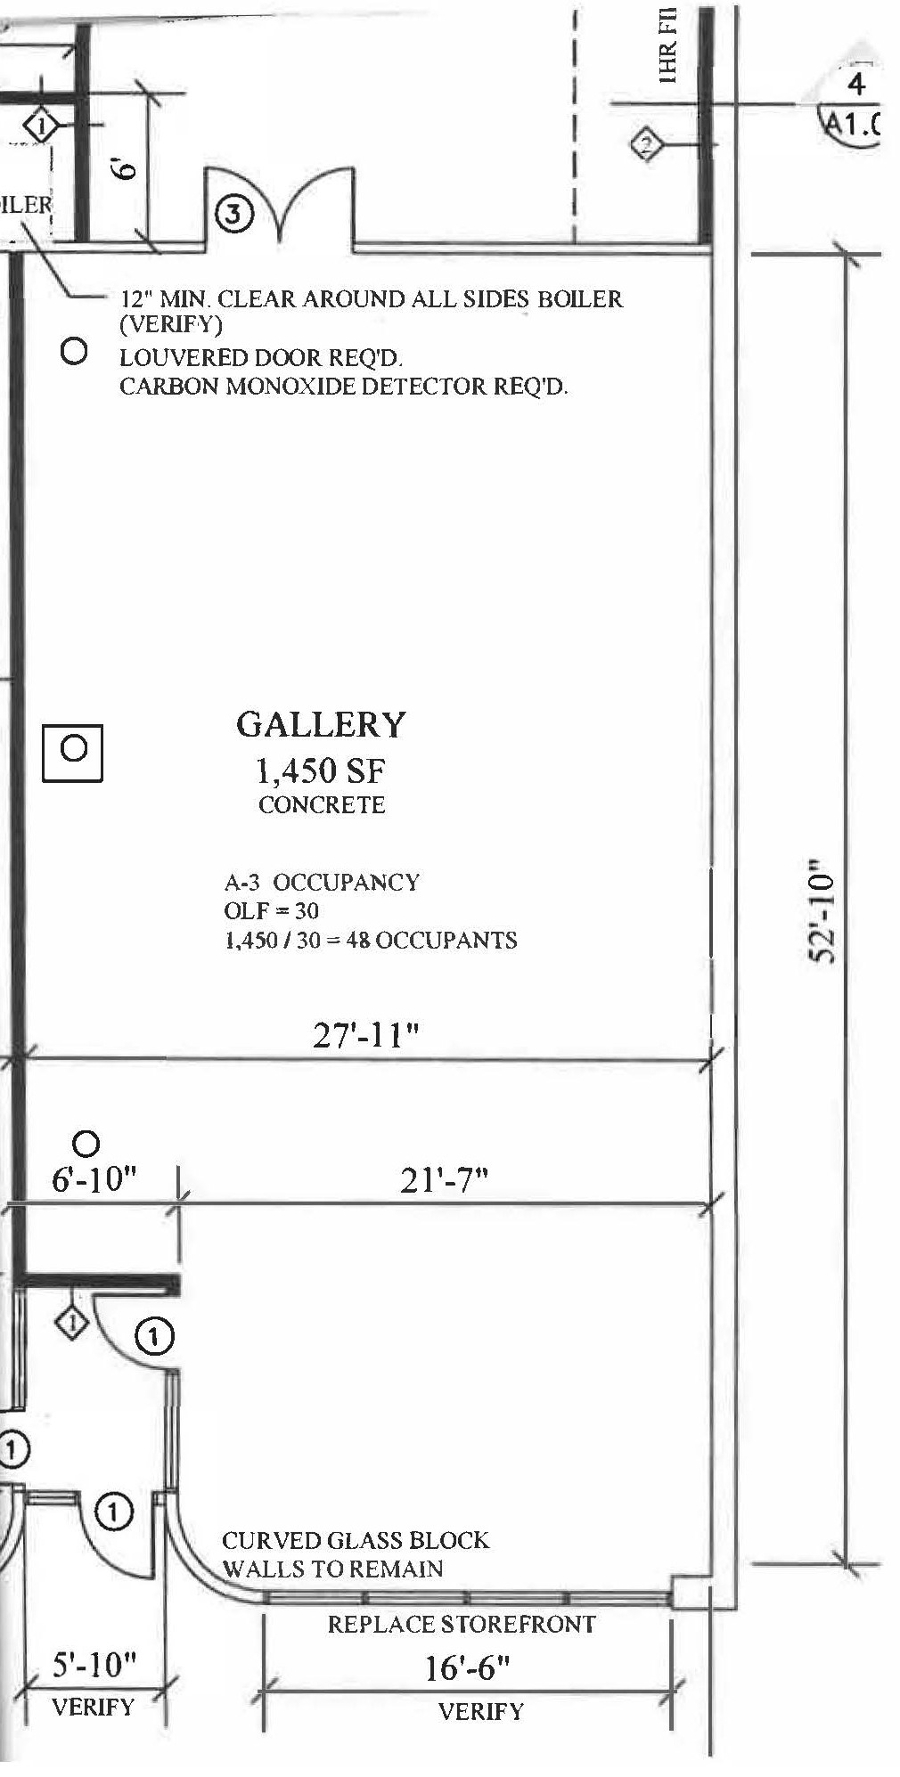 Image of 437CO Art Gallery Blue Prints 